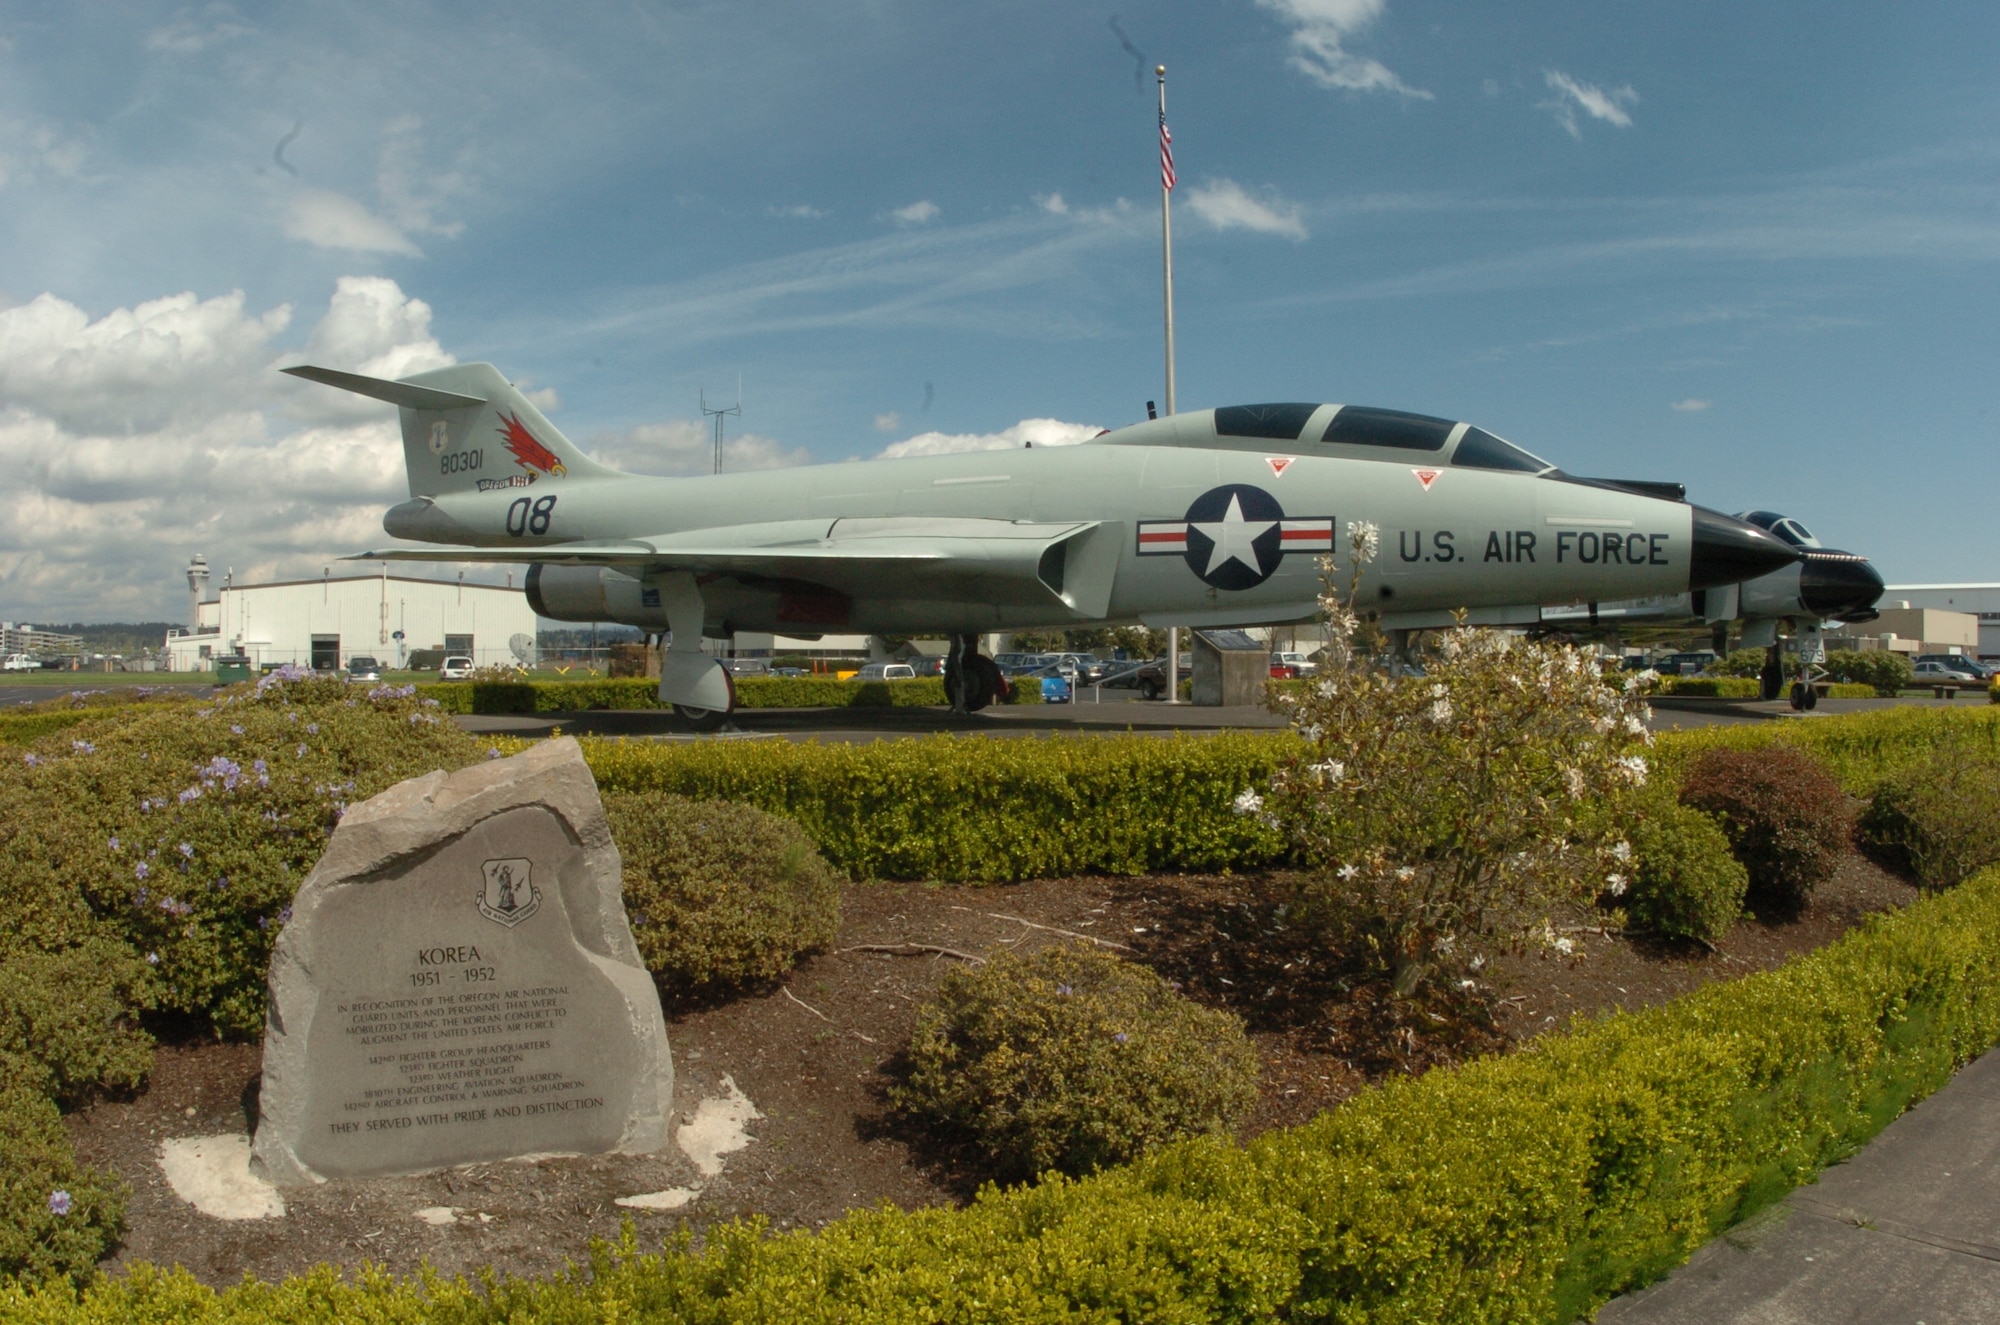 The Oregon ANG Memorial Park, with view featuring the Korean War memorial and the F-101B Voodoo flown by the 142nd Fighter Wing. (Air National Guard photo by Tech. Sgt. John Hughel, 142nd Fighter Wing Public Affairs)